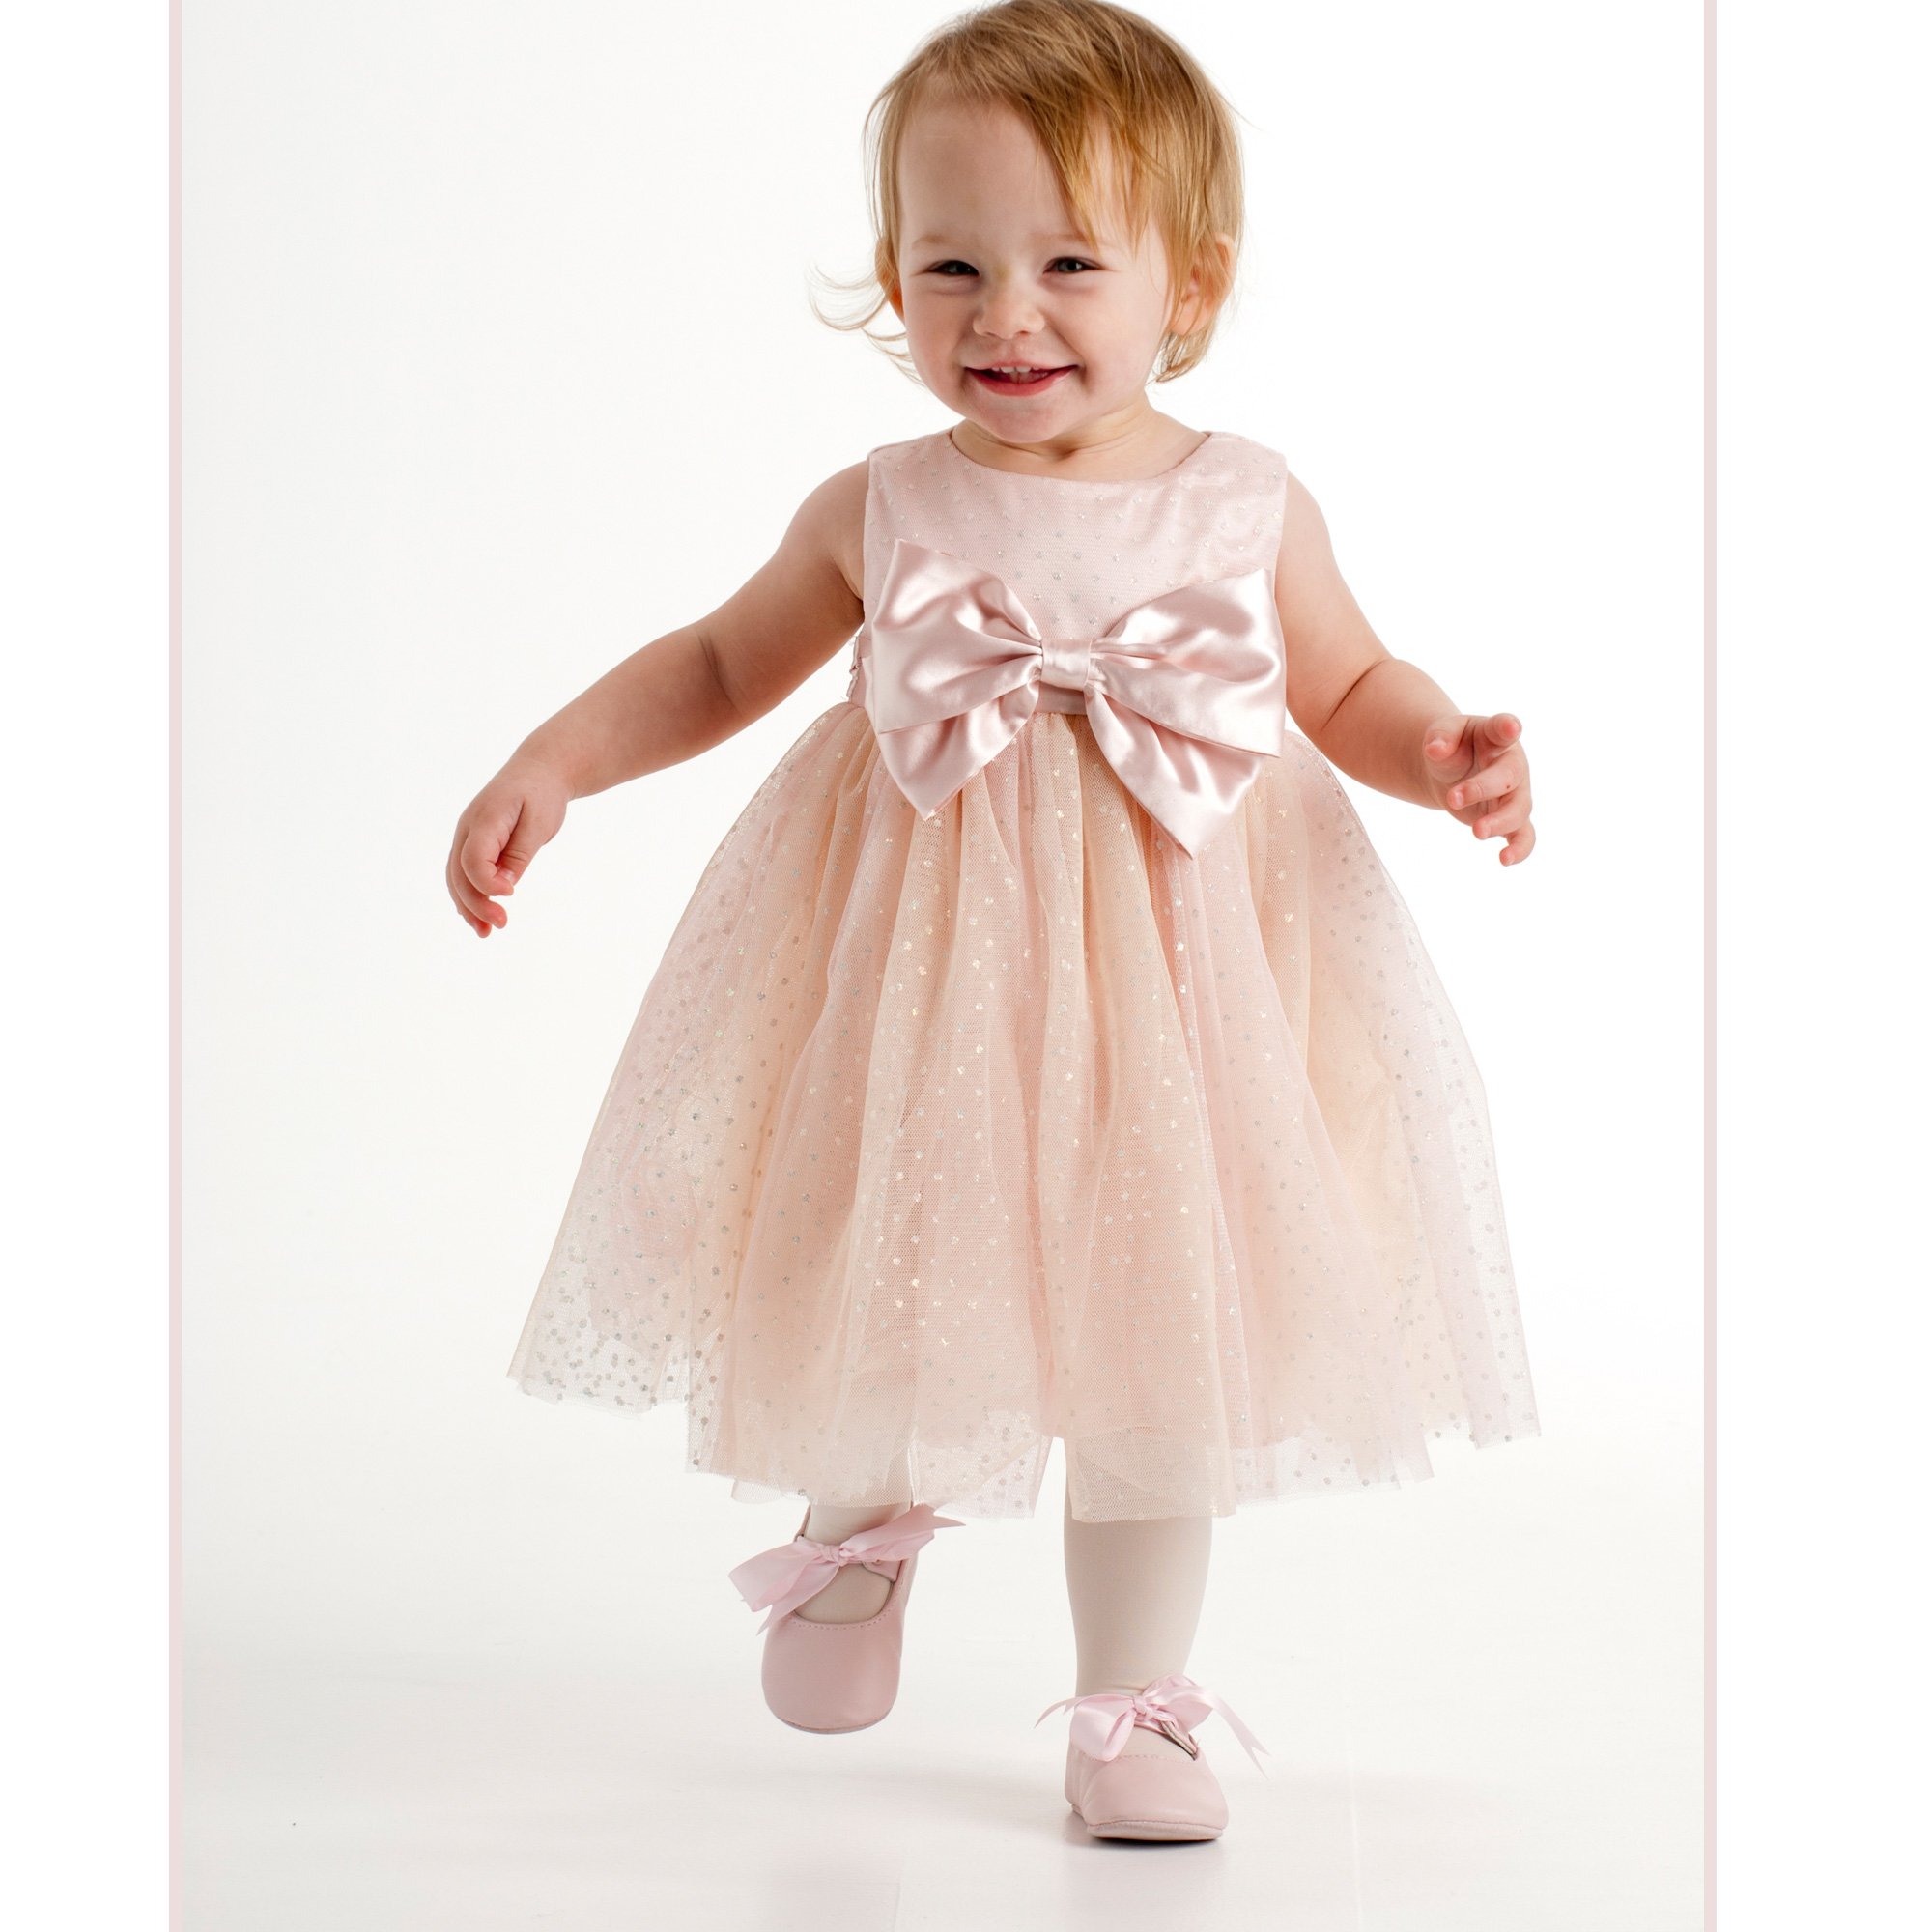 princess party dresses for toddlers